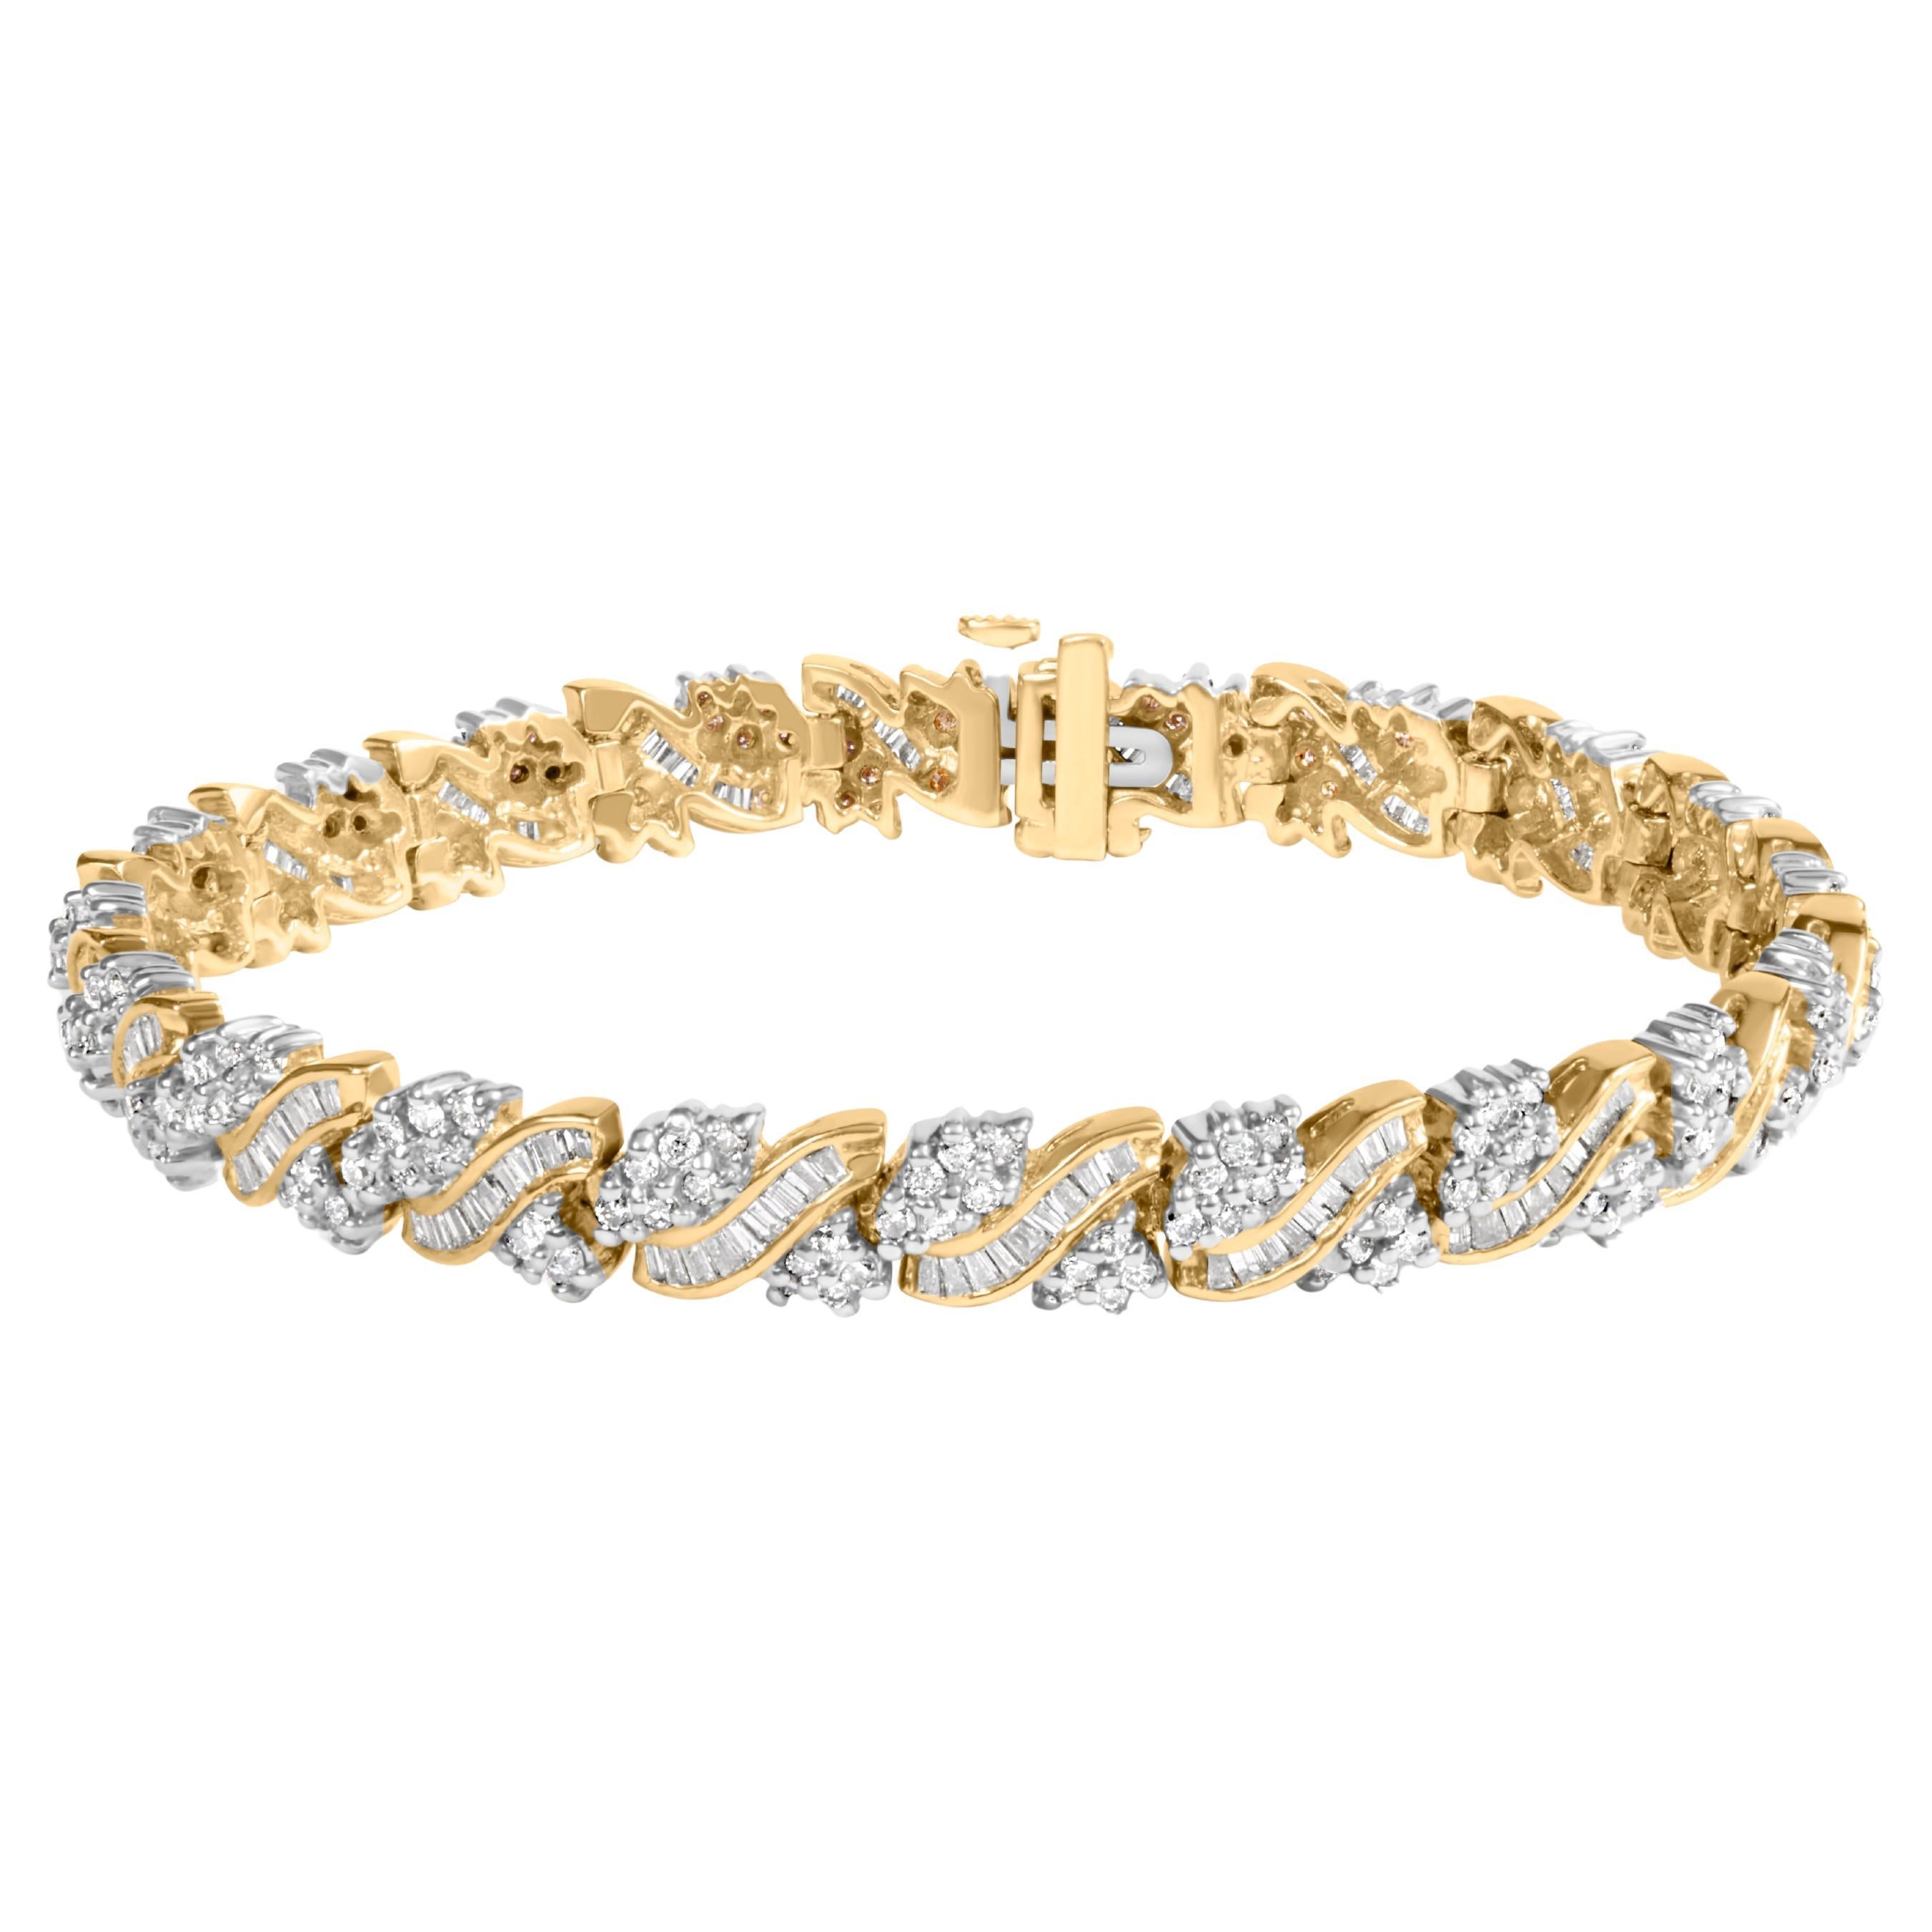 14K Yellow Gold 4.0 Carat Diamond Woven Composite Cluster and S-Link Bracelet